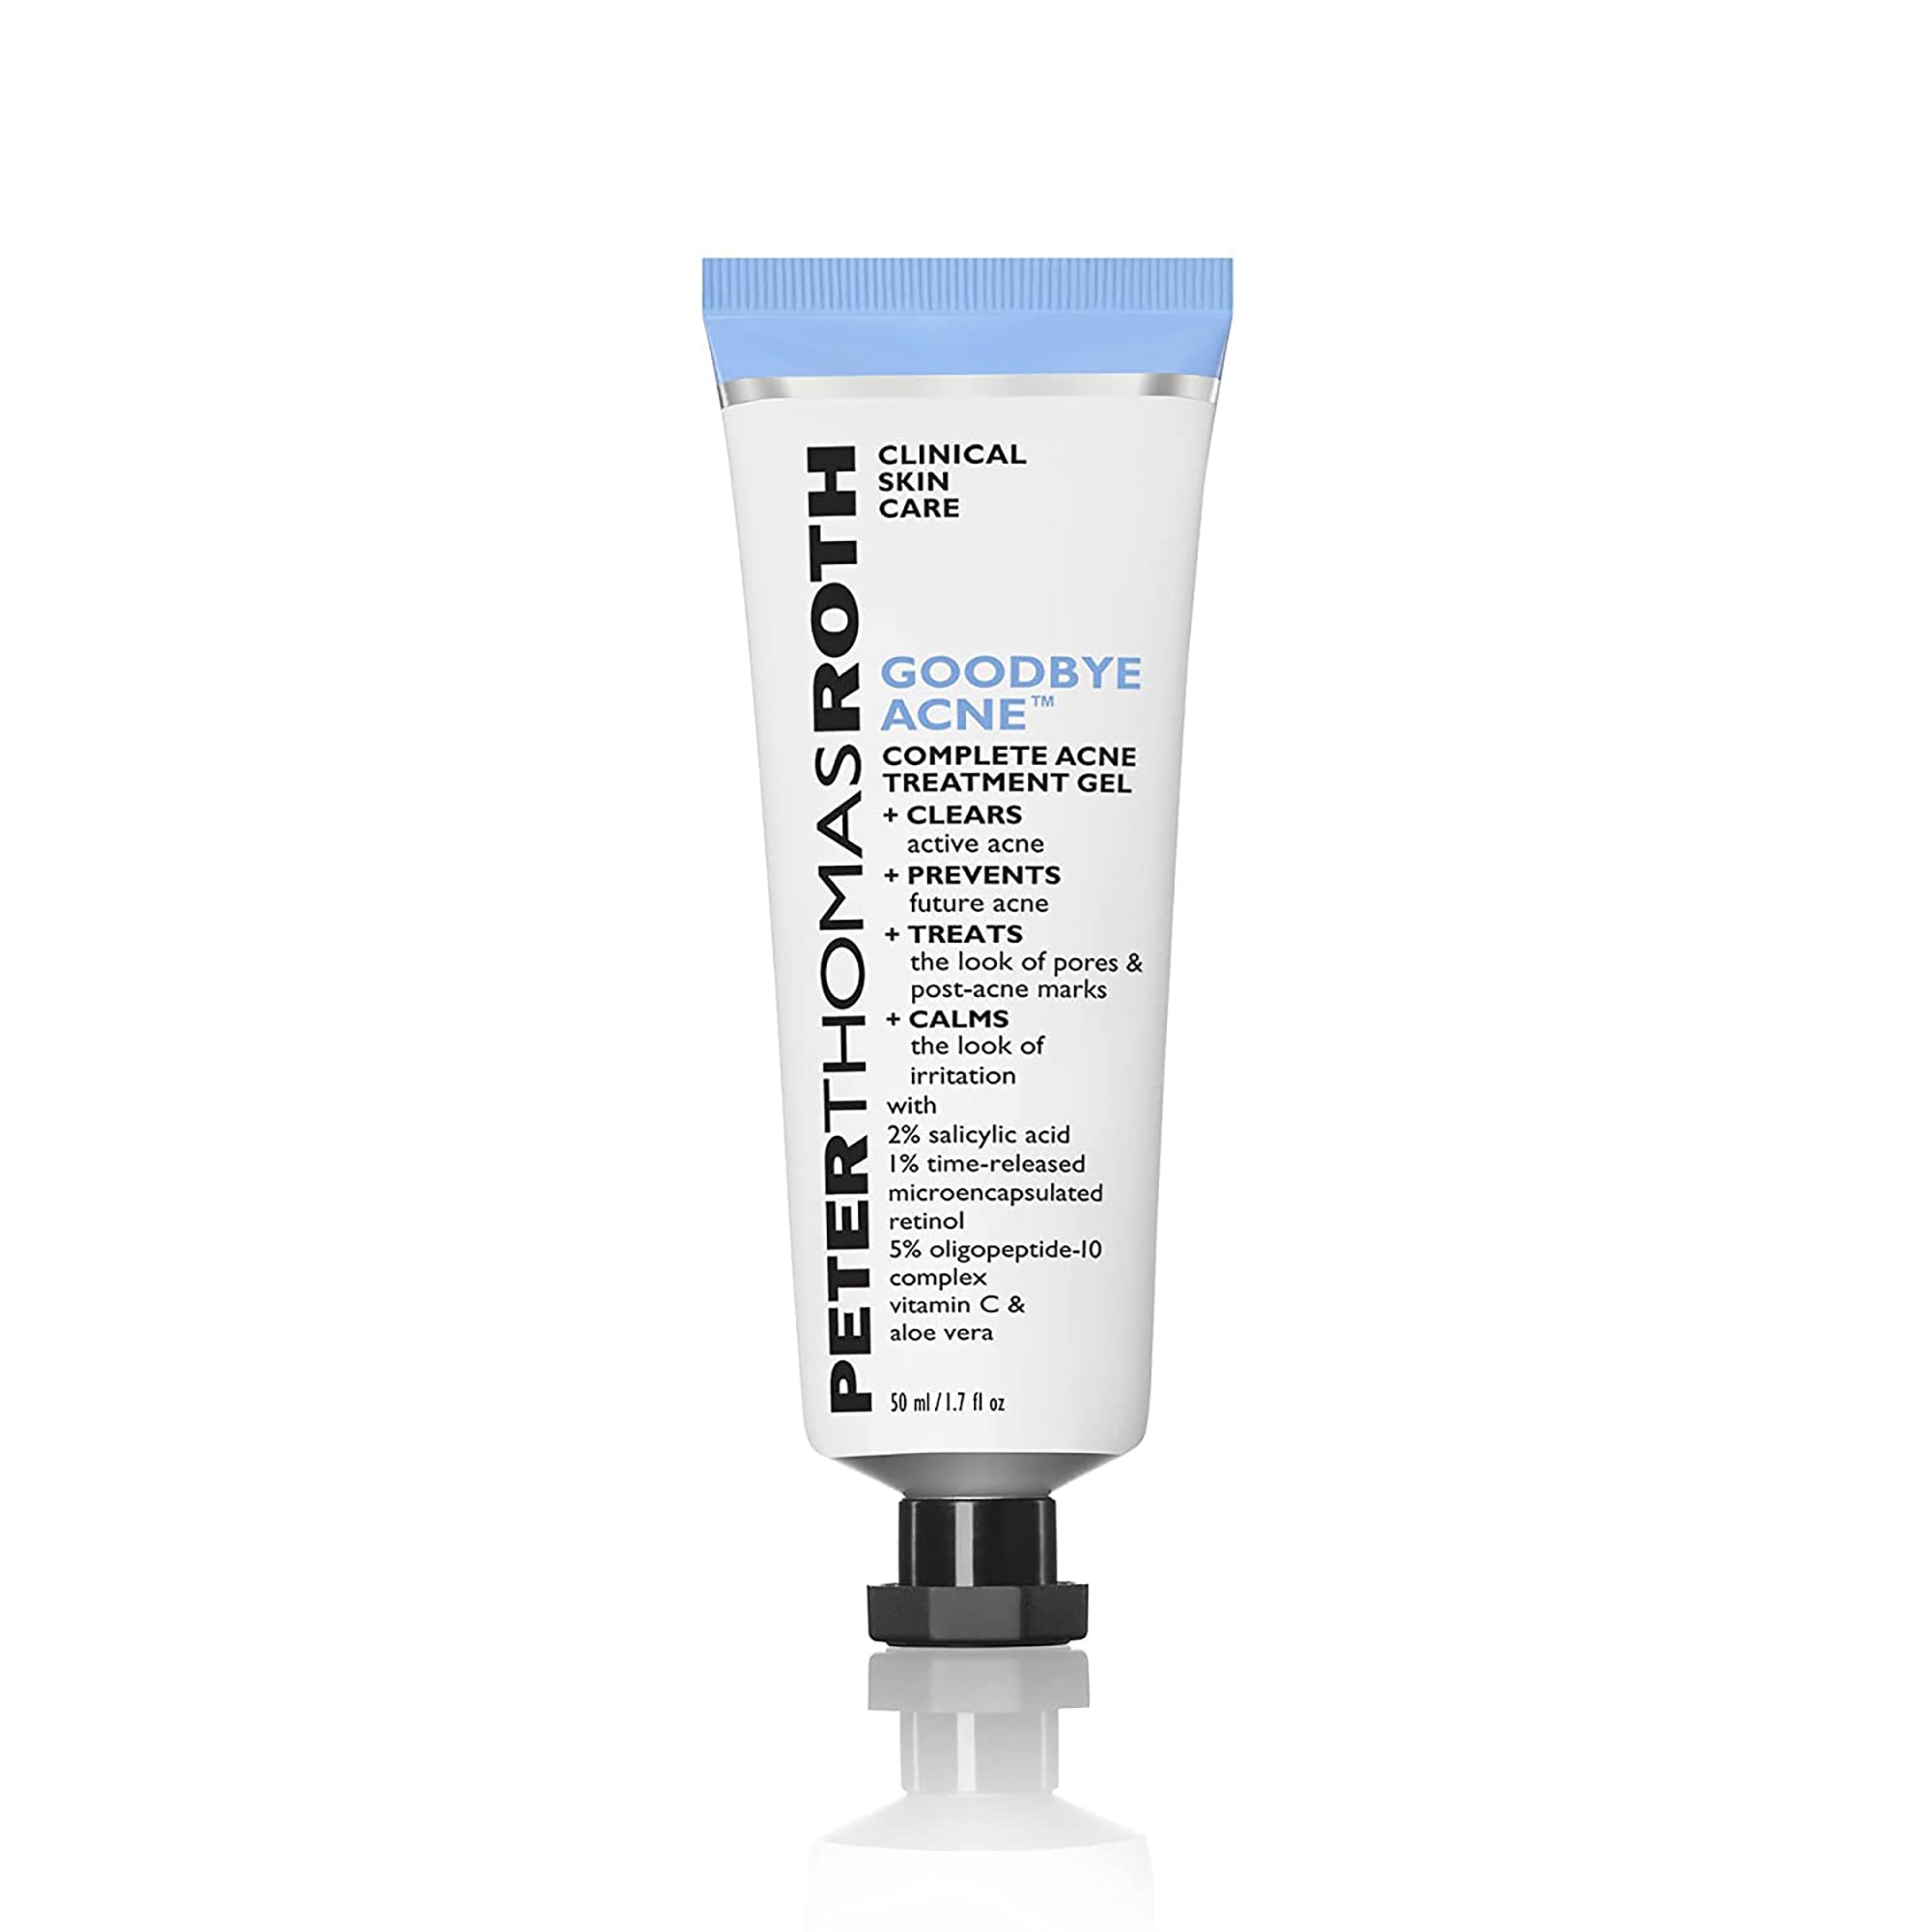 Peter Thomas Roth Goodbye Acne Complete Acne Treatment Gel / 1.7 oz